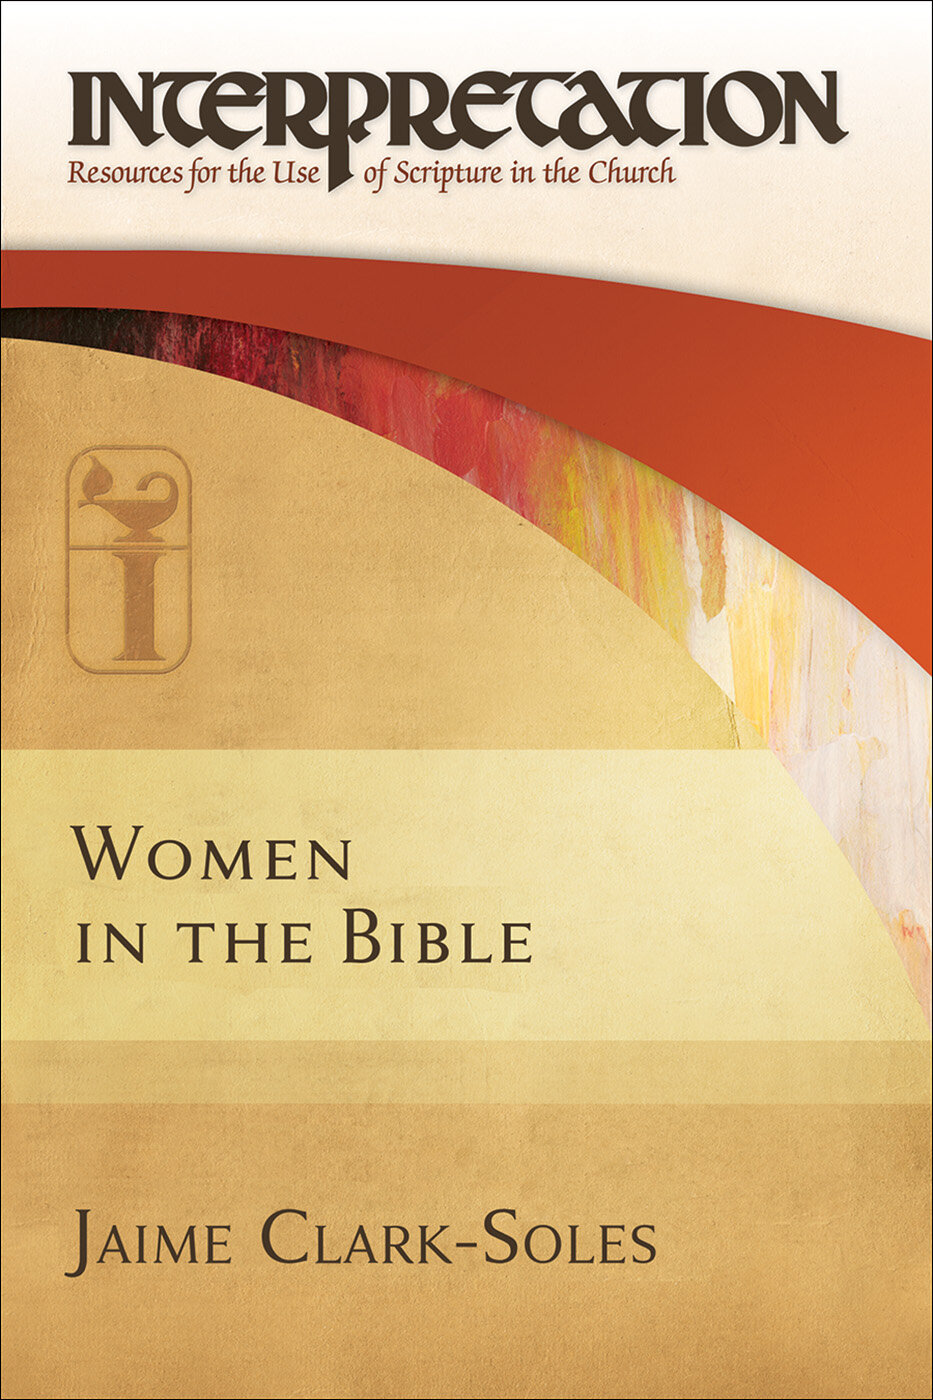 Women in the Bible (Interpretation: Resources for the Use of Scripture in the Church)